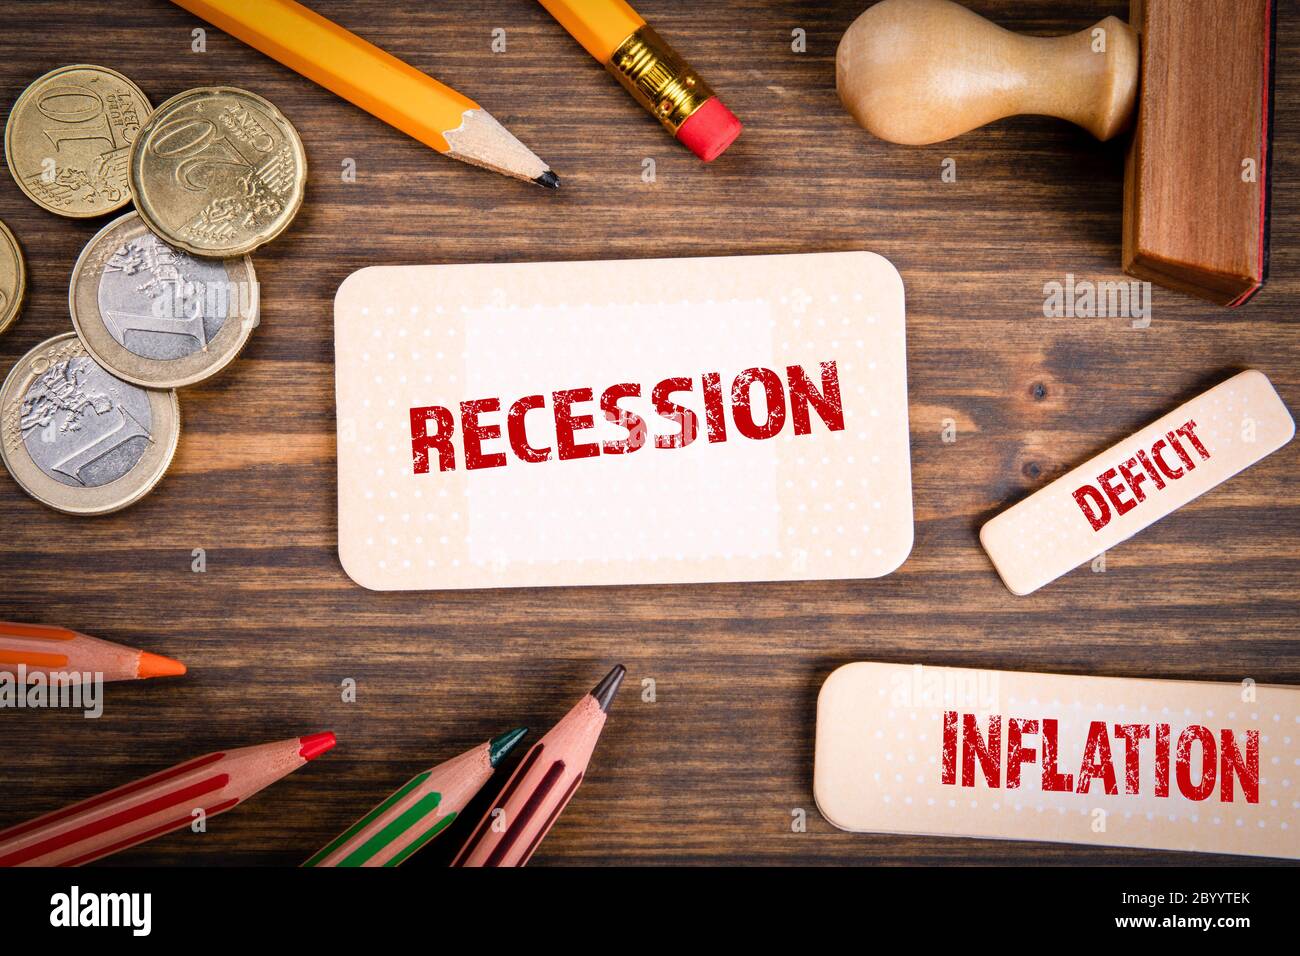 RECESSION, INFLATION and DEFICIT. Economic crisis, financial difficulties, falling investment and insolvency concept. Note sheet like medical plaster Stock Photo